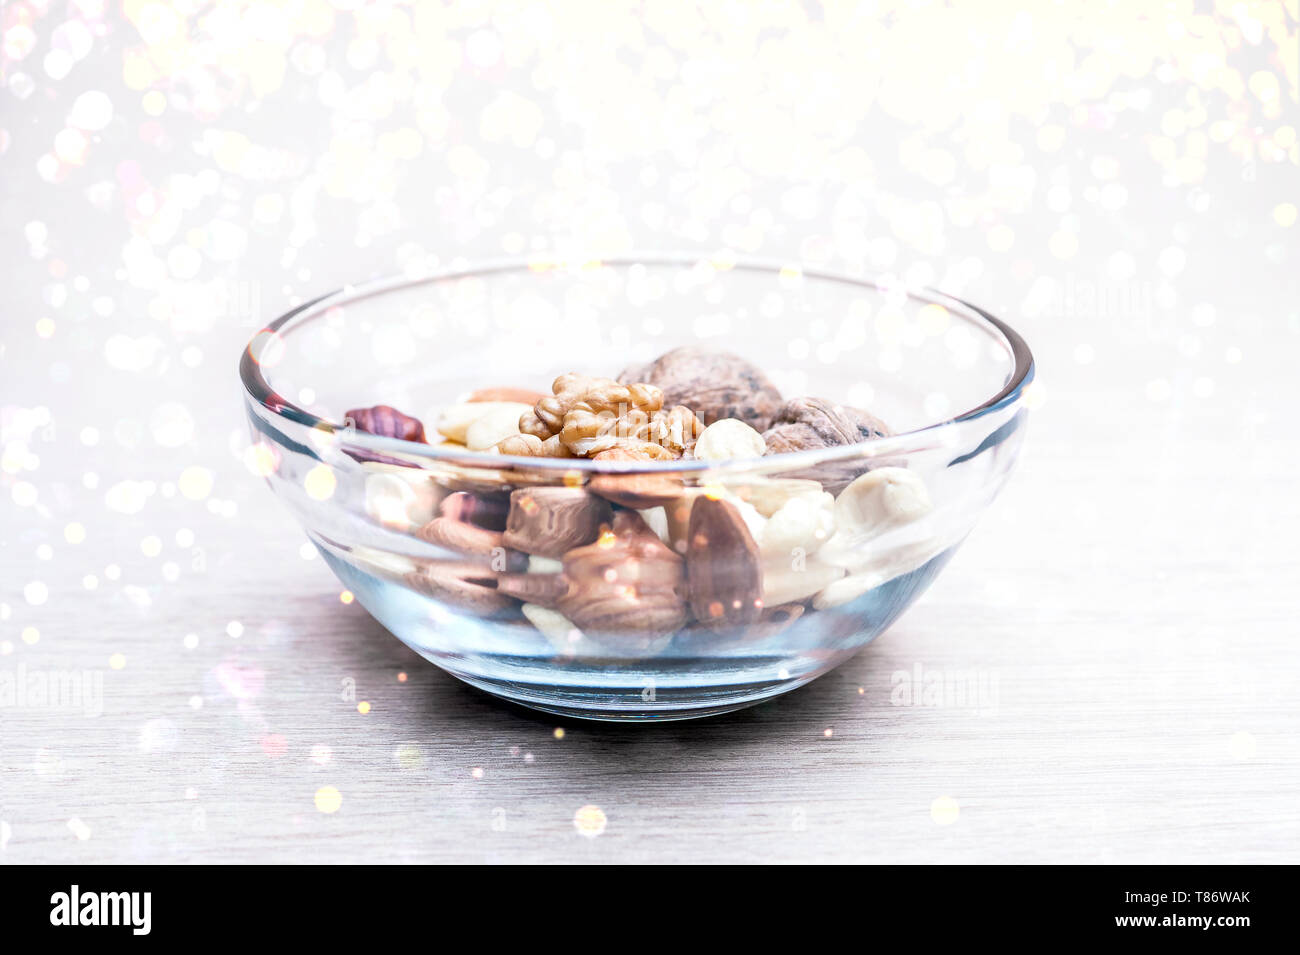 Almonds, Hazelnuts, Cashew Nuts and Whole Walnuts in a Glass Bowl. Round Golden Soft Lights. Healthy Organic Snack, Breakfast, Food Ingredients Concep Stock Photo